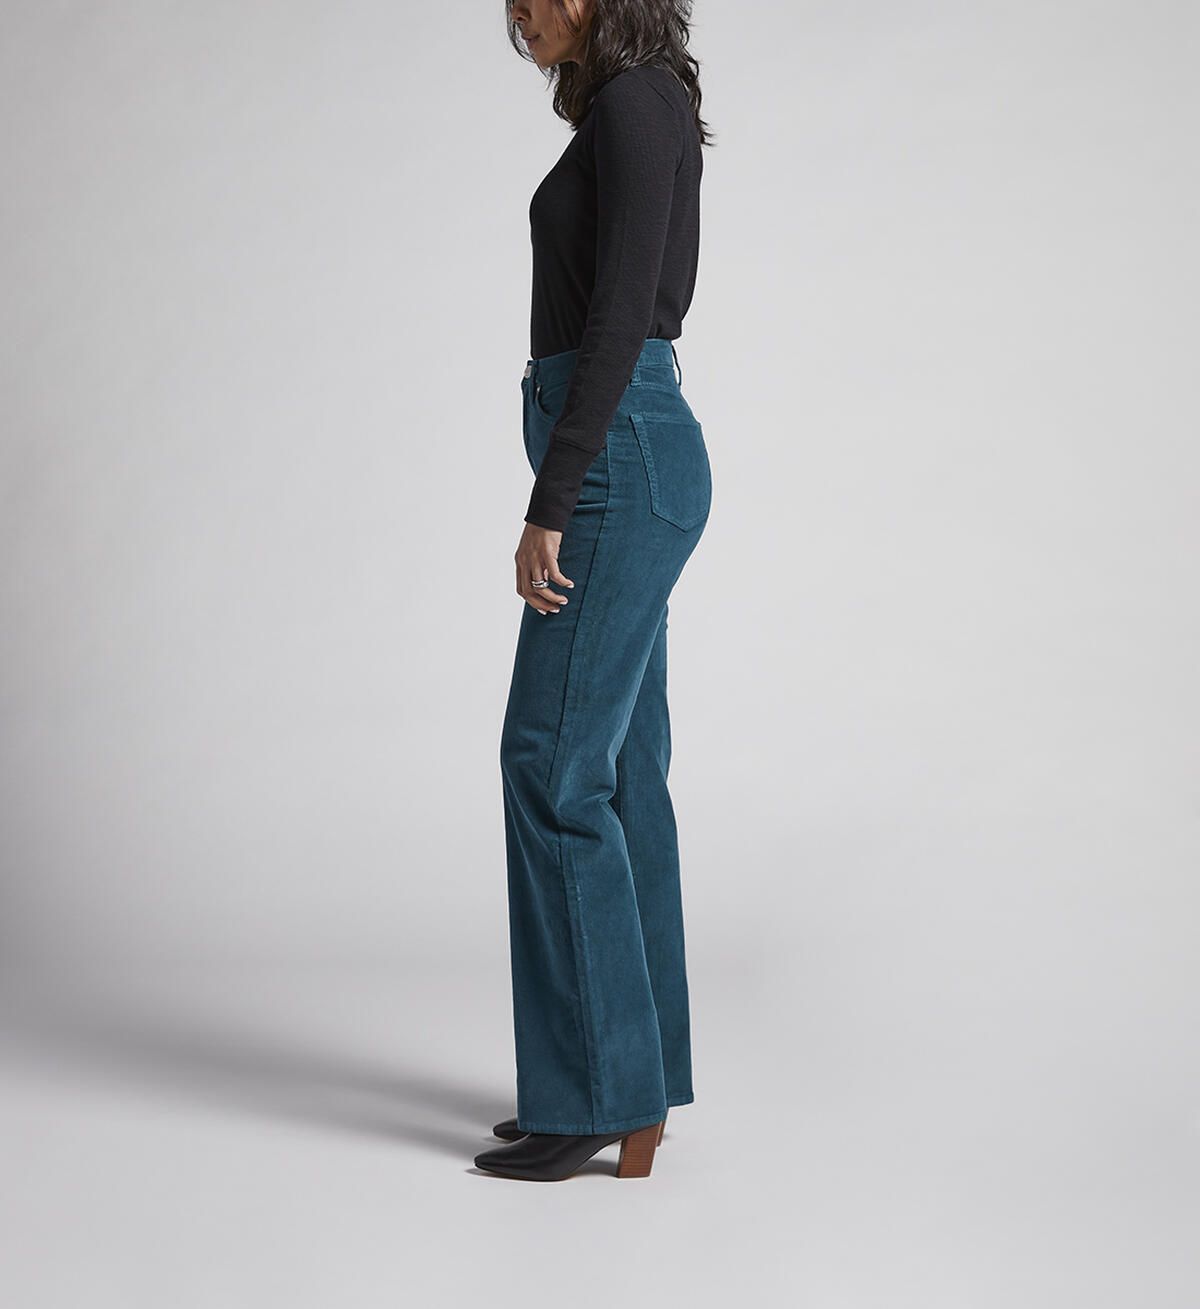 Highly Desirable High Rise Trouser Leg Pants | Silver Jeans Co. (US)